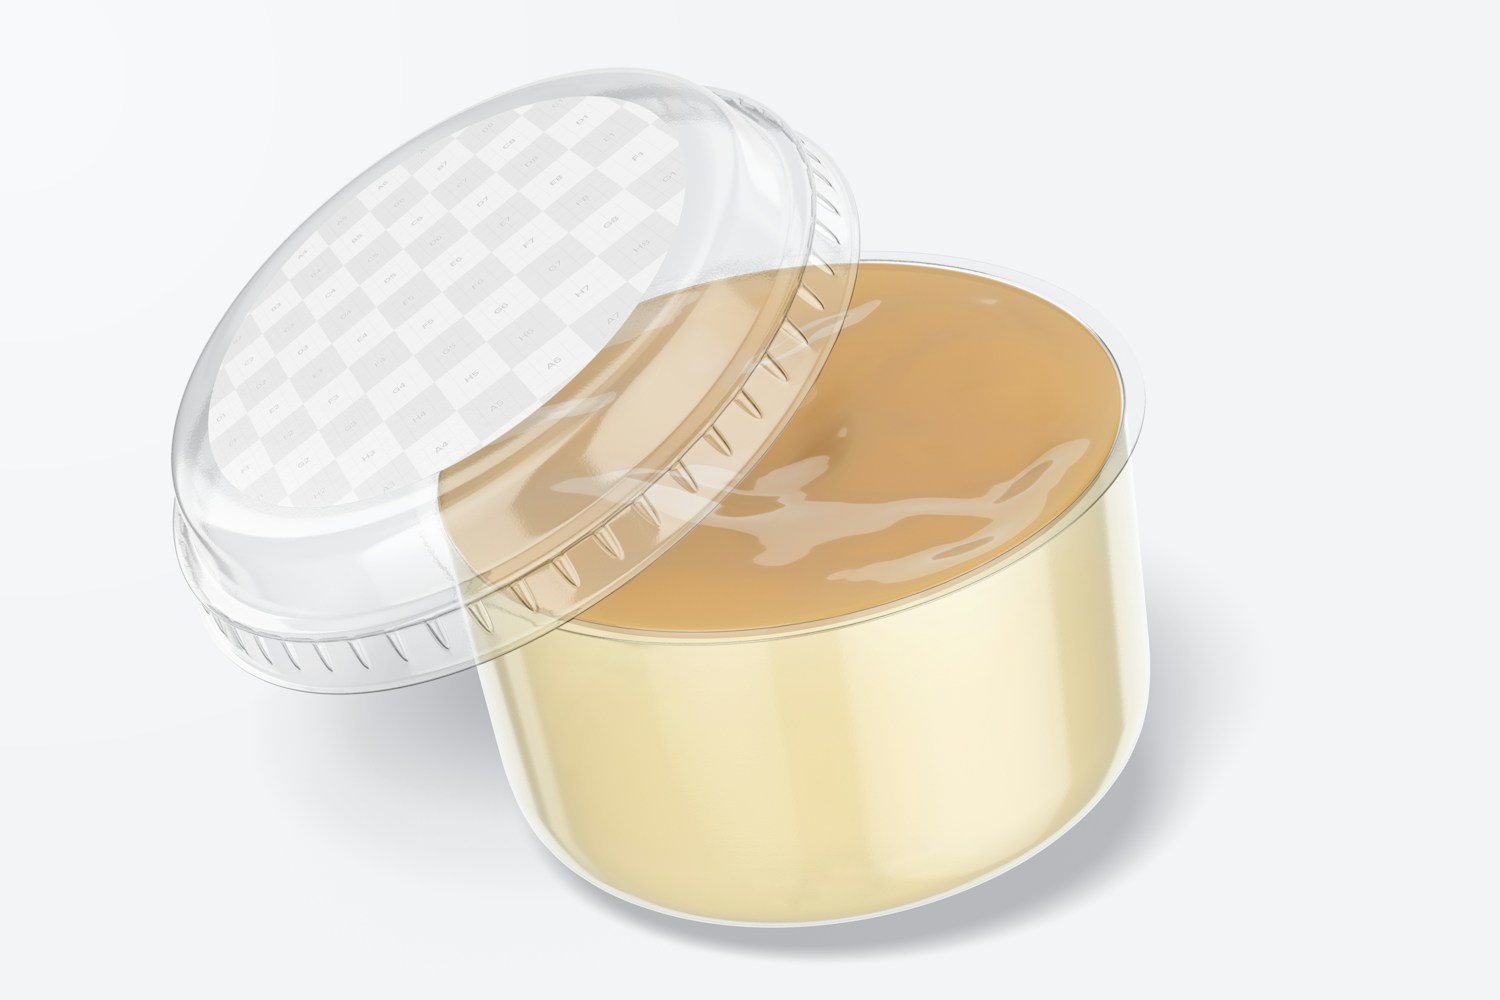 Pudding Plastic Cup Mockup, Opened